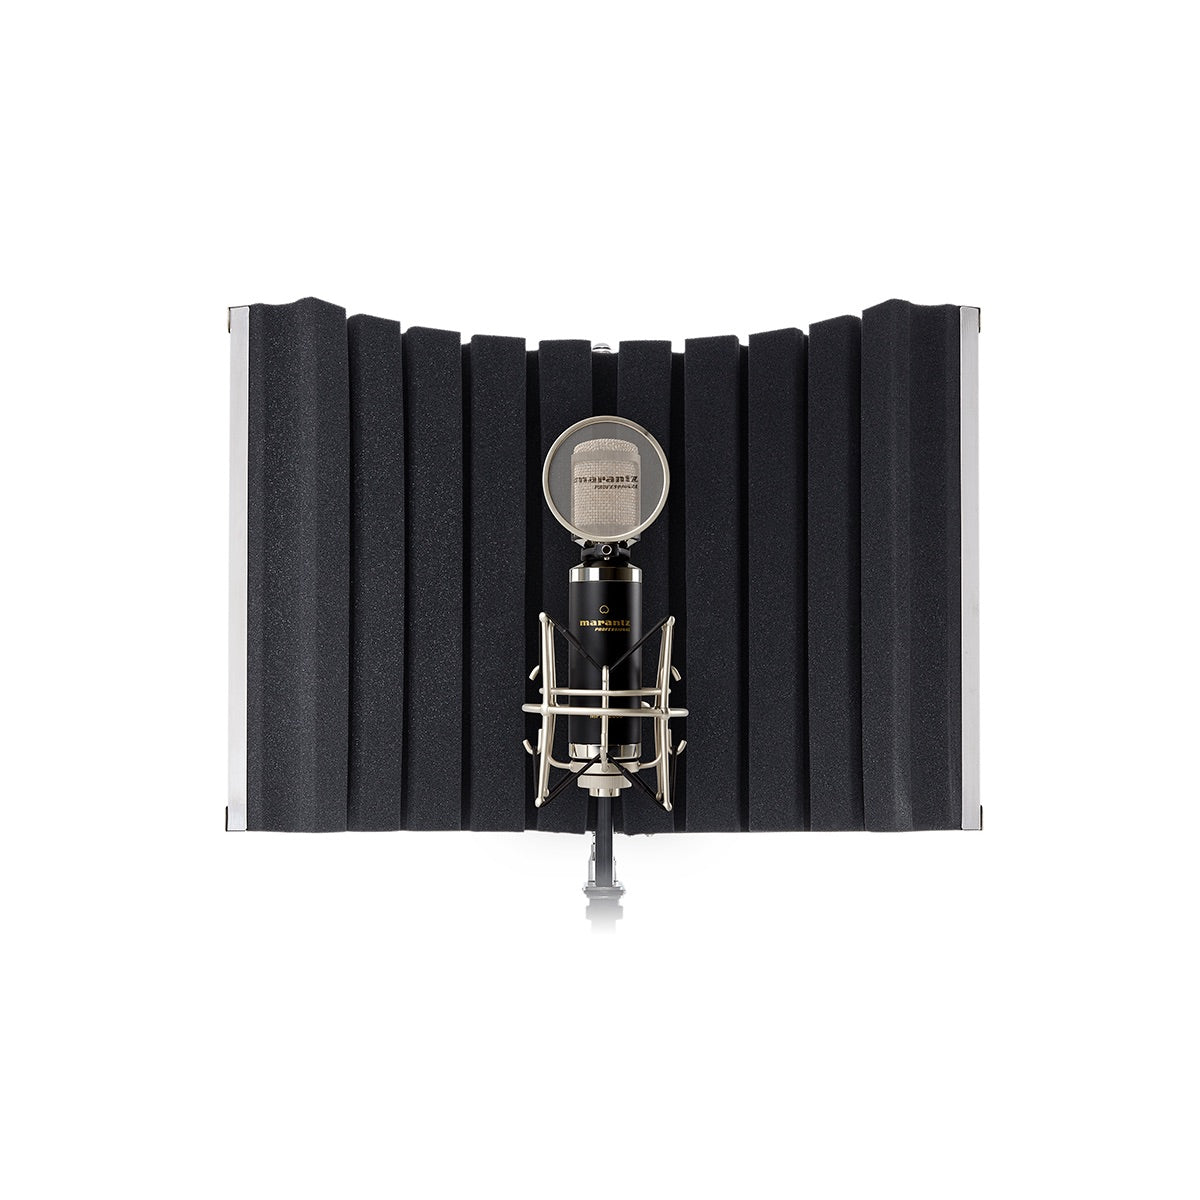 Marantz Sound Shield Compact - Vocal Reflection Filter, shown with microphone (not included)